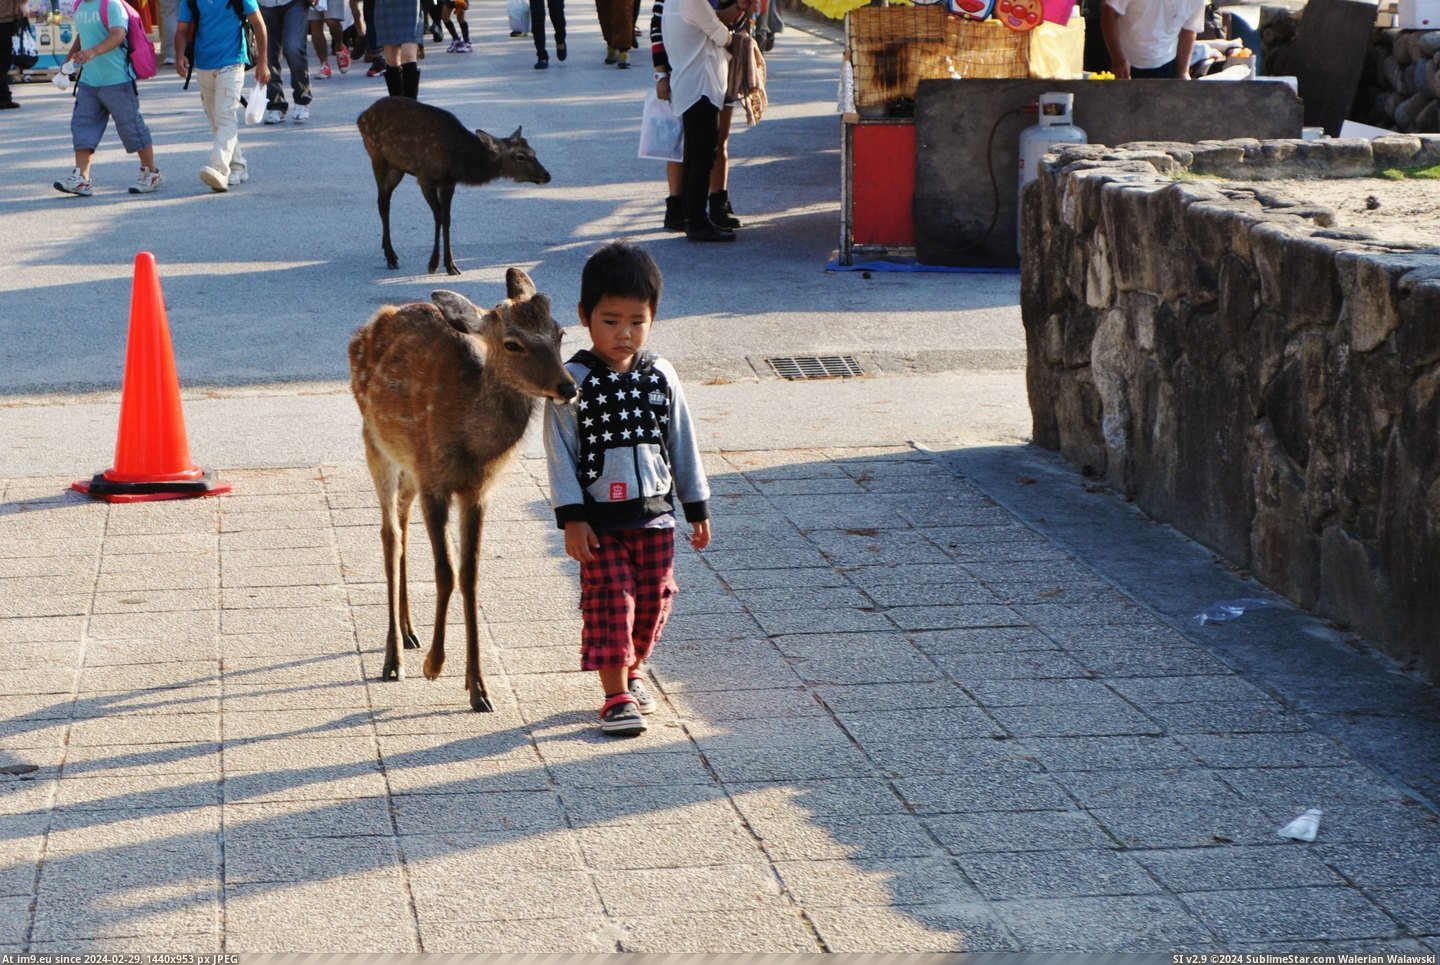 #One #Free #Island #Hundreds #Roam #Silently #Miyajima #Japan #Walking #Deer [Aww] There's an island in Japan, Miyajima, where deer roam free by the hundreds. This one was silently walking around with this Pic. (Obraz z album My r/AWW favs))